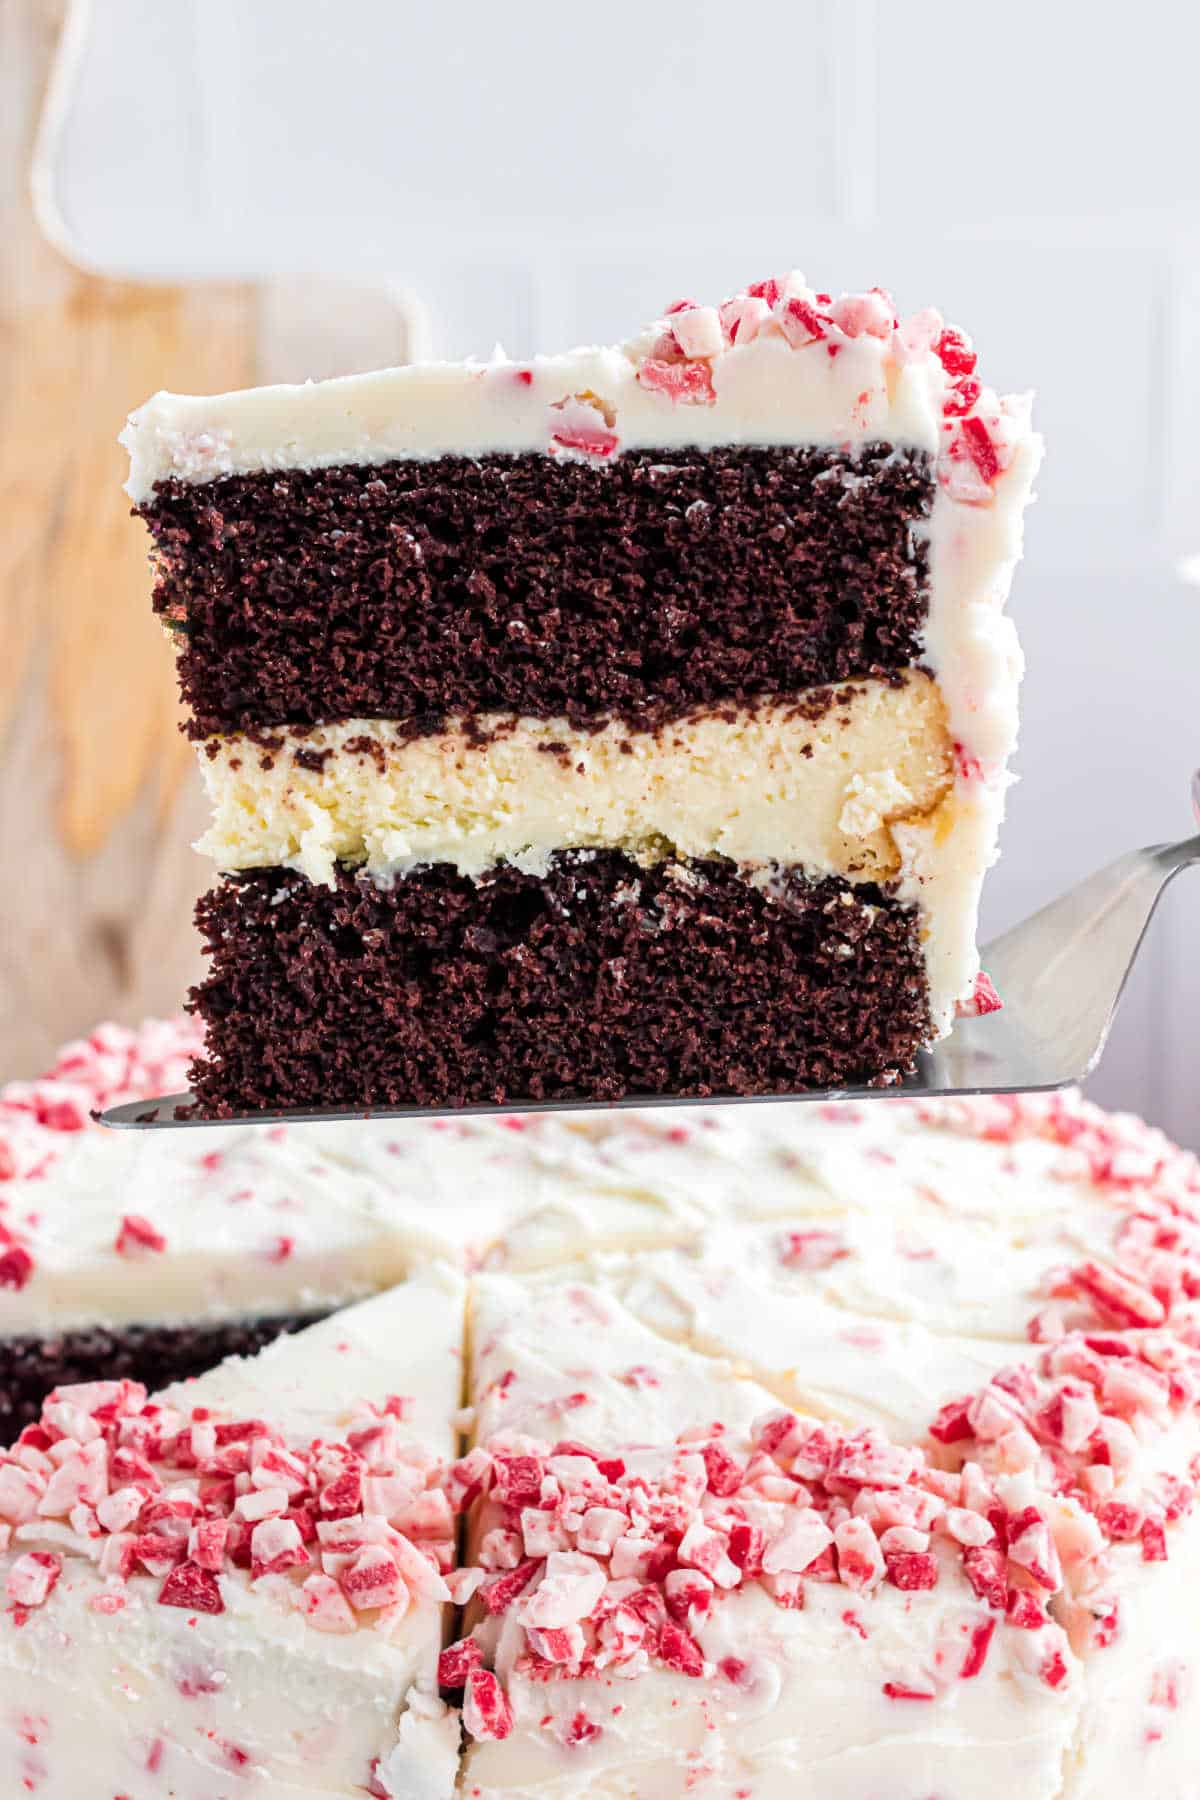 Slice of cake with chocolate layers surrpounding cheesecake and iced with peppermint frosting.